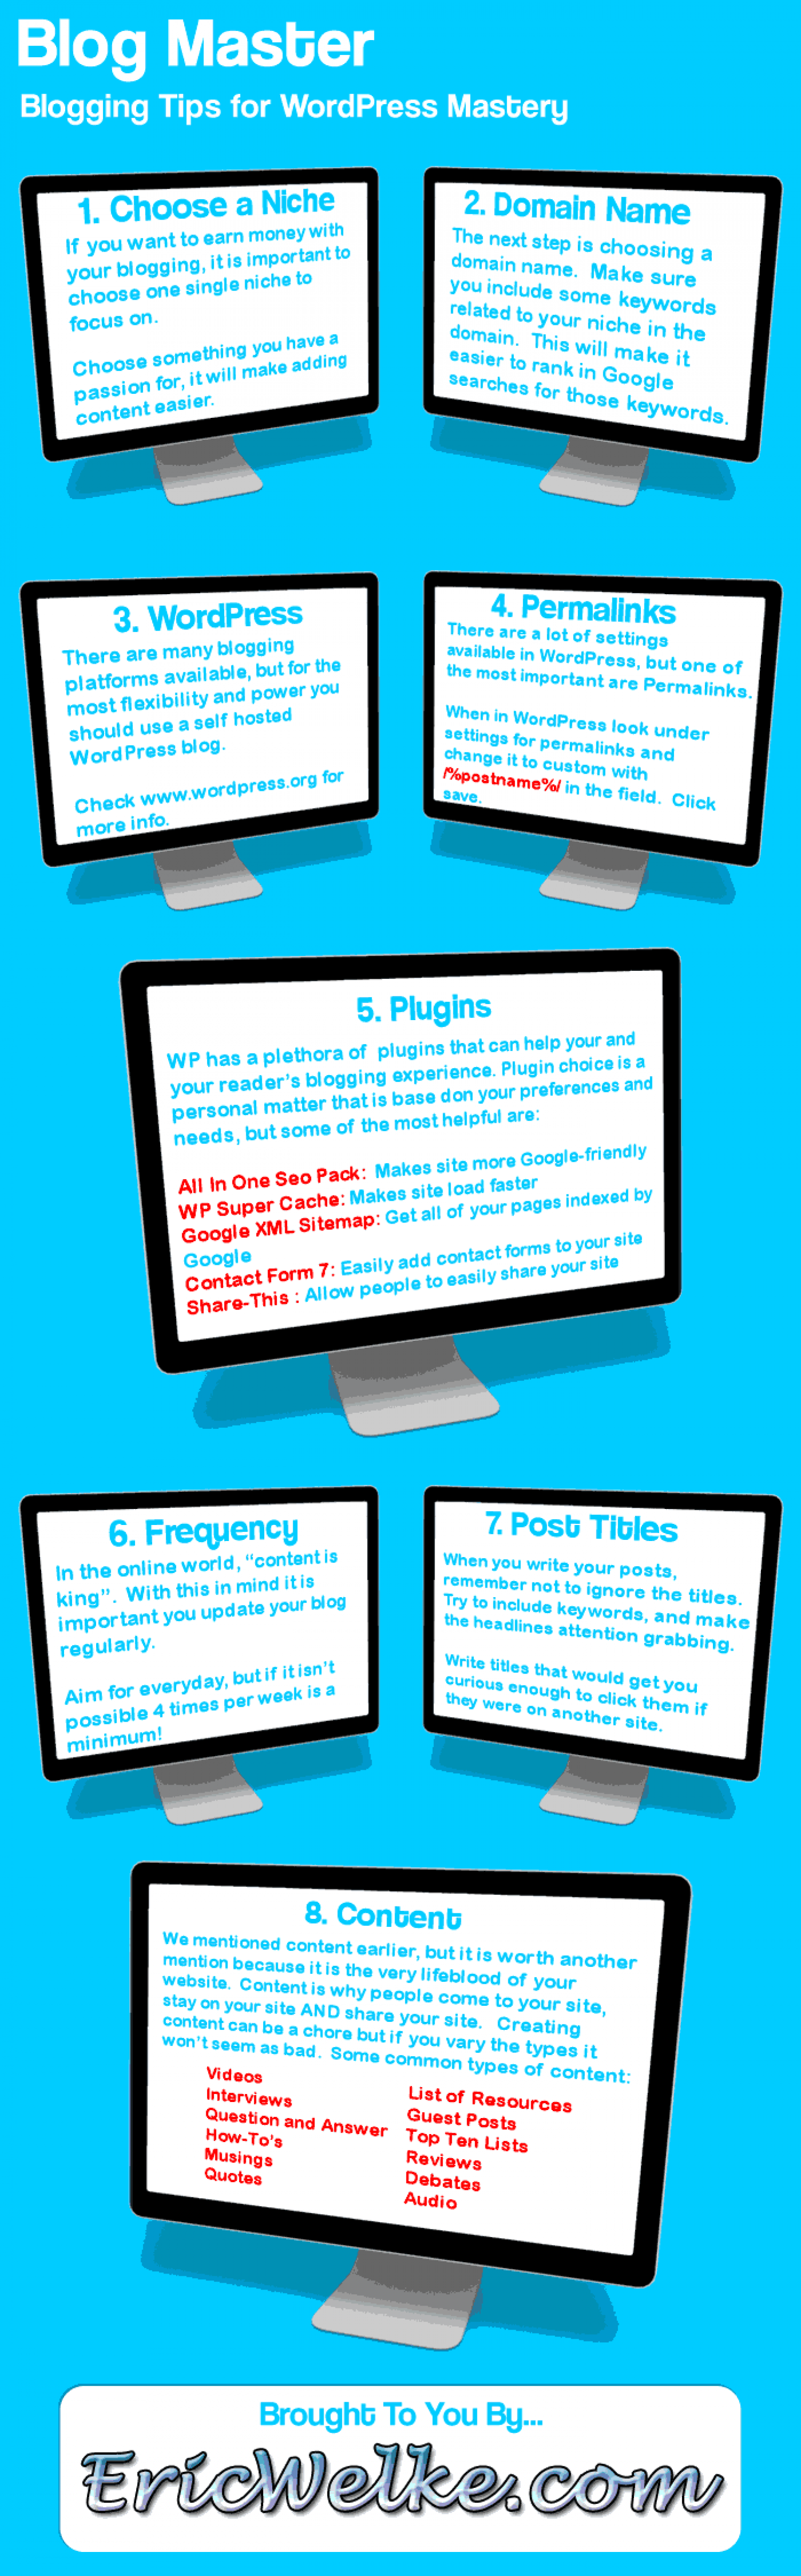 Blogging Tips for WordPress Mastery [Infographic] Infographic